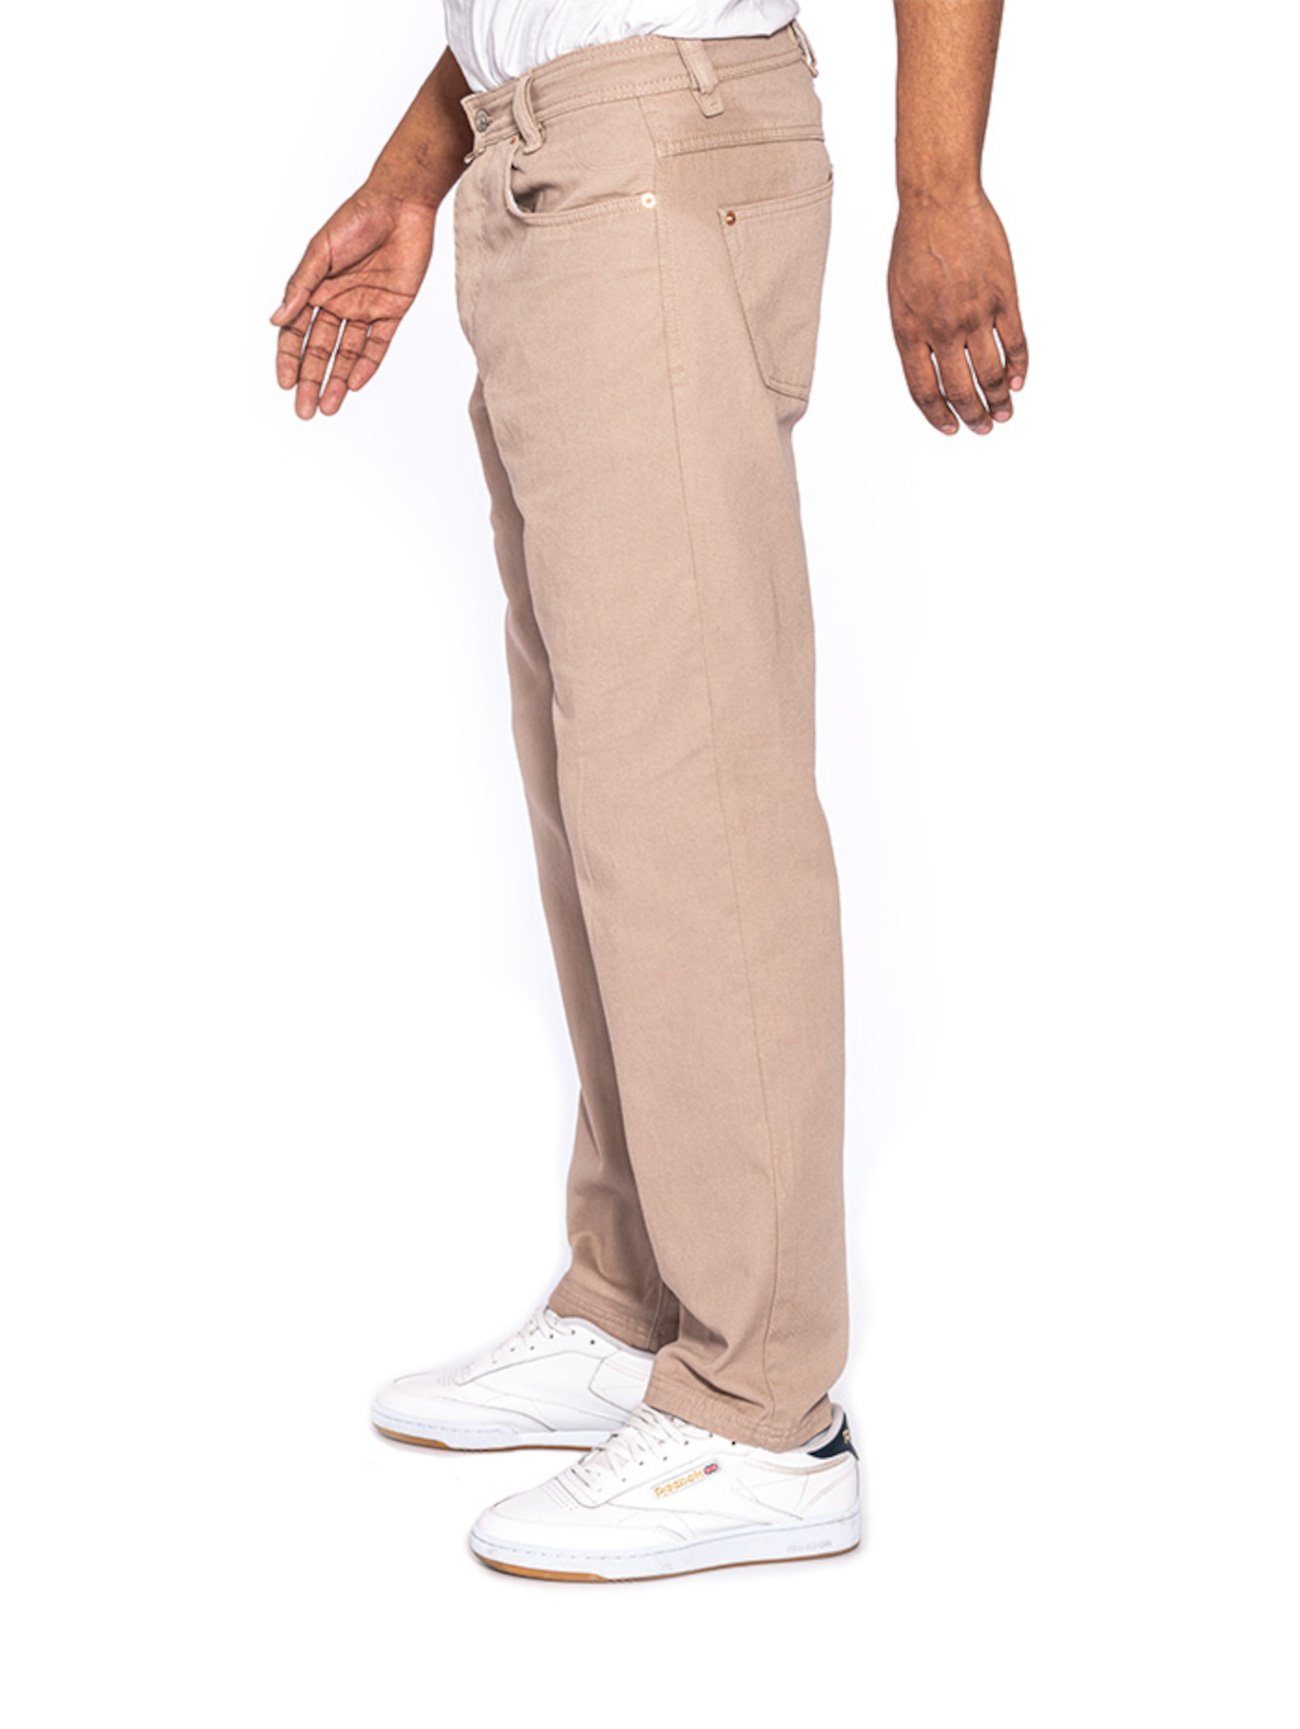 Tapered-fit-Jeans Zicco Fit, Sommerhose, Relaxed 472 Beige Jeans PICALDI Freizeithose Fit, Gabardine Loose